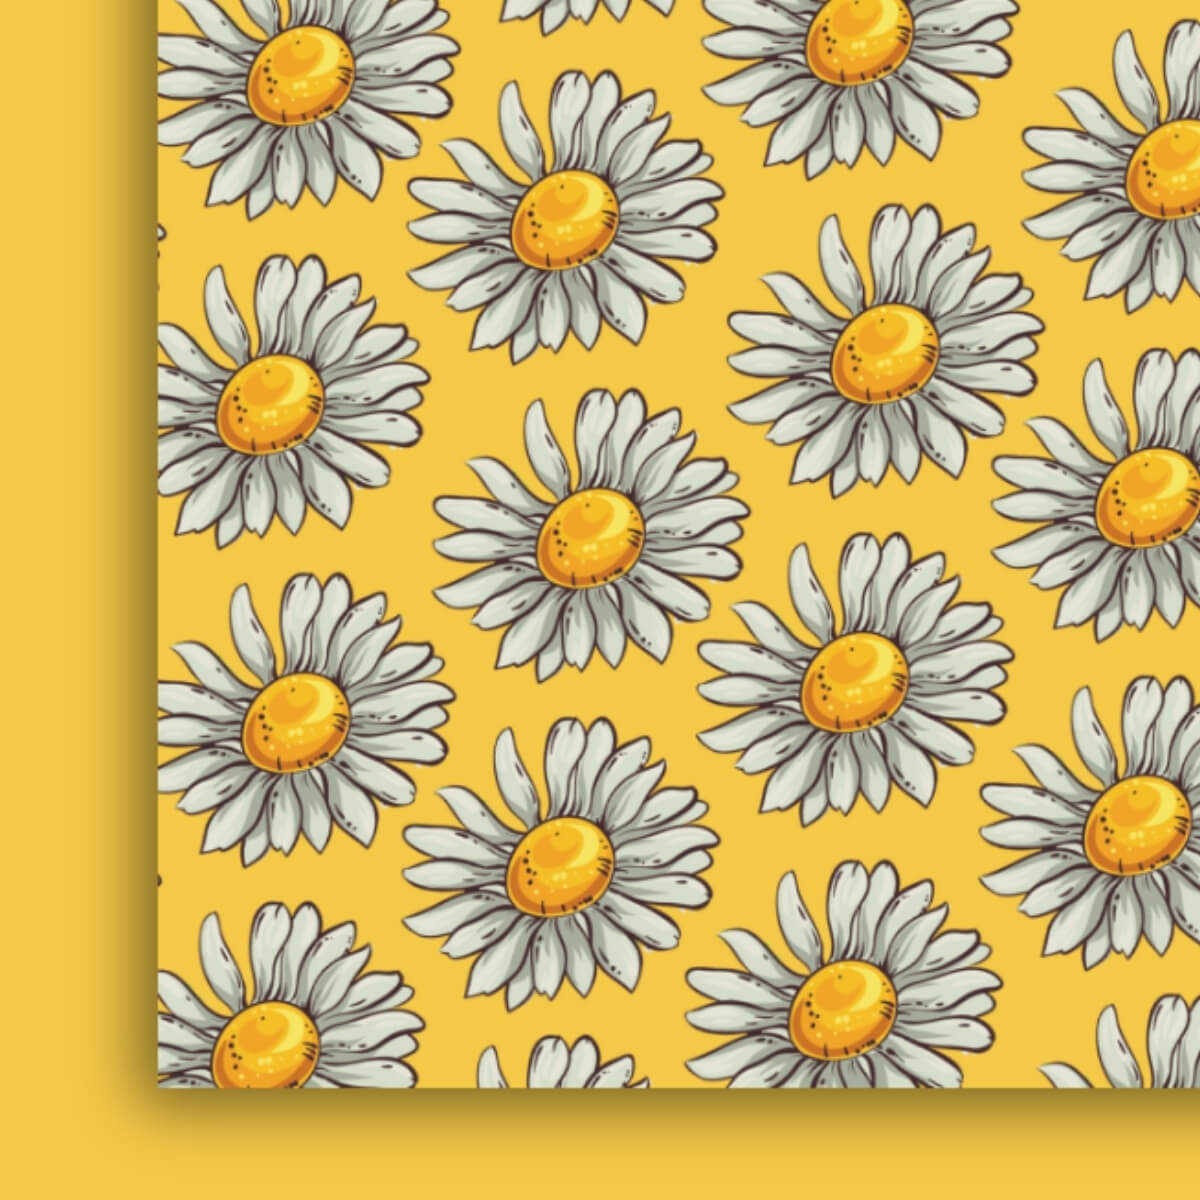 Get a Daisy Gift card and add some elegance